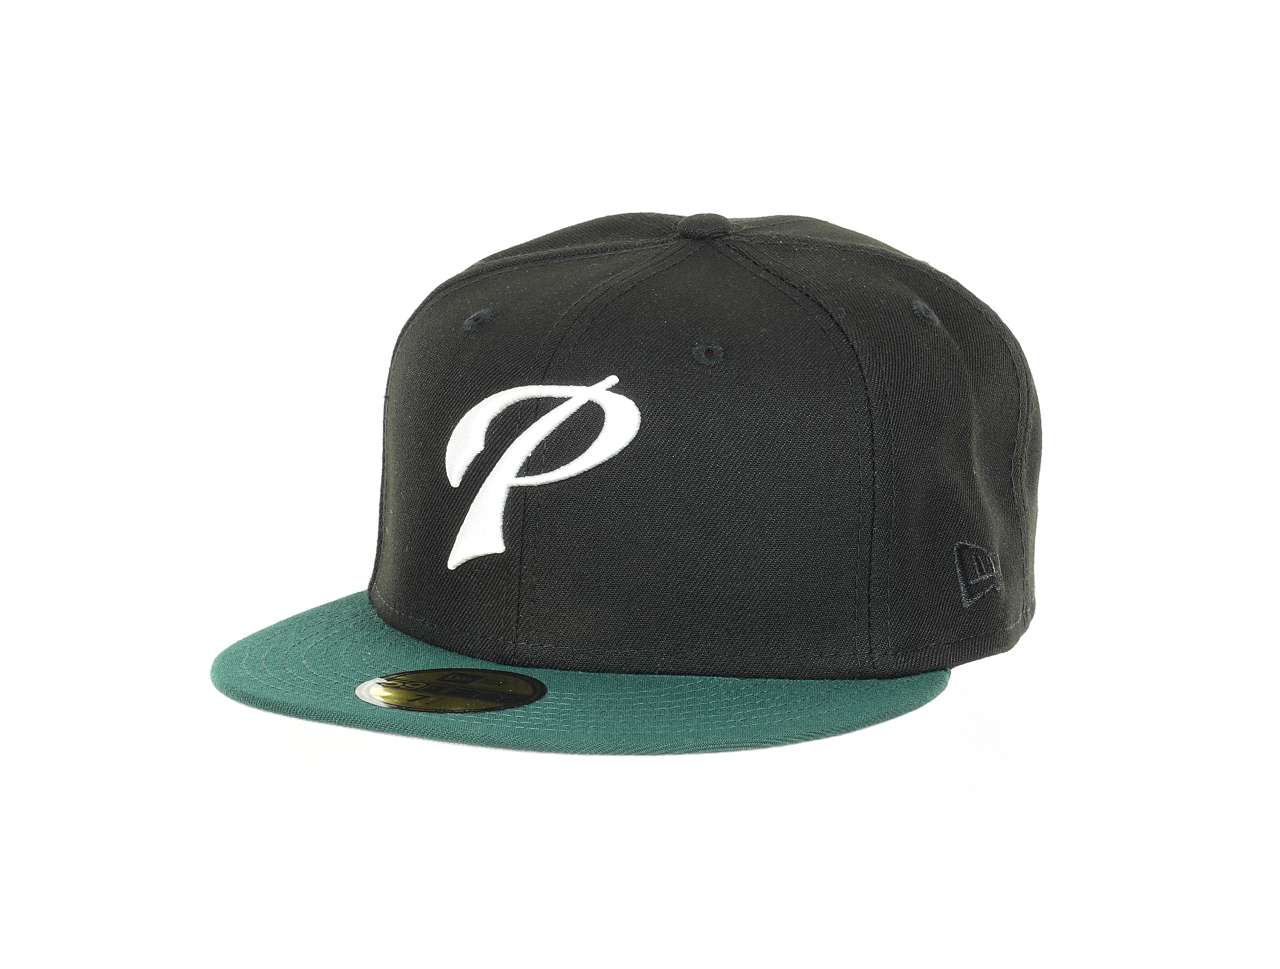 San Diego Padres MLB 40th Anniversary Sidepatch Sidepatch TwoTone Black Green 59Fifty Basecap New Era